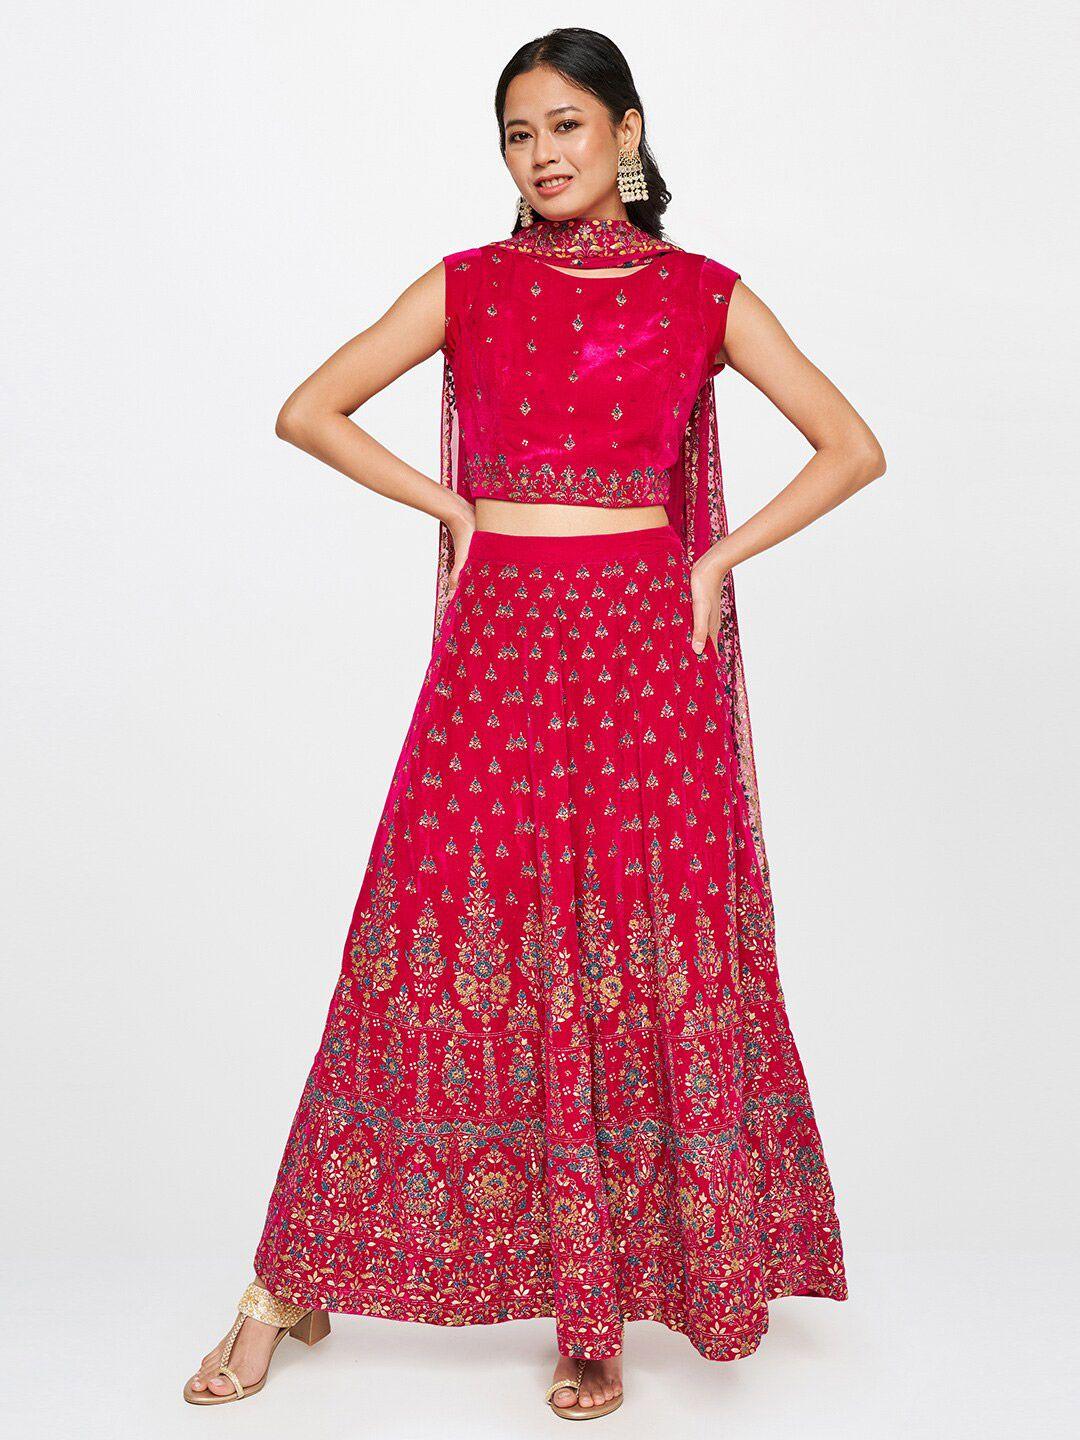 global desi floral printed ready to wear lehenga & blouse with dupatta